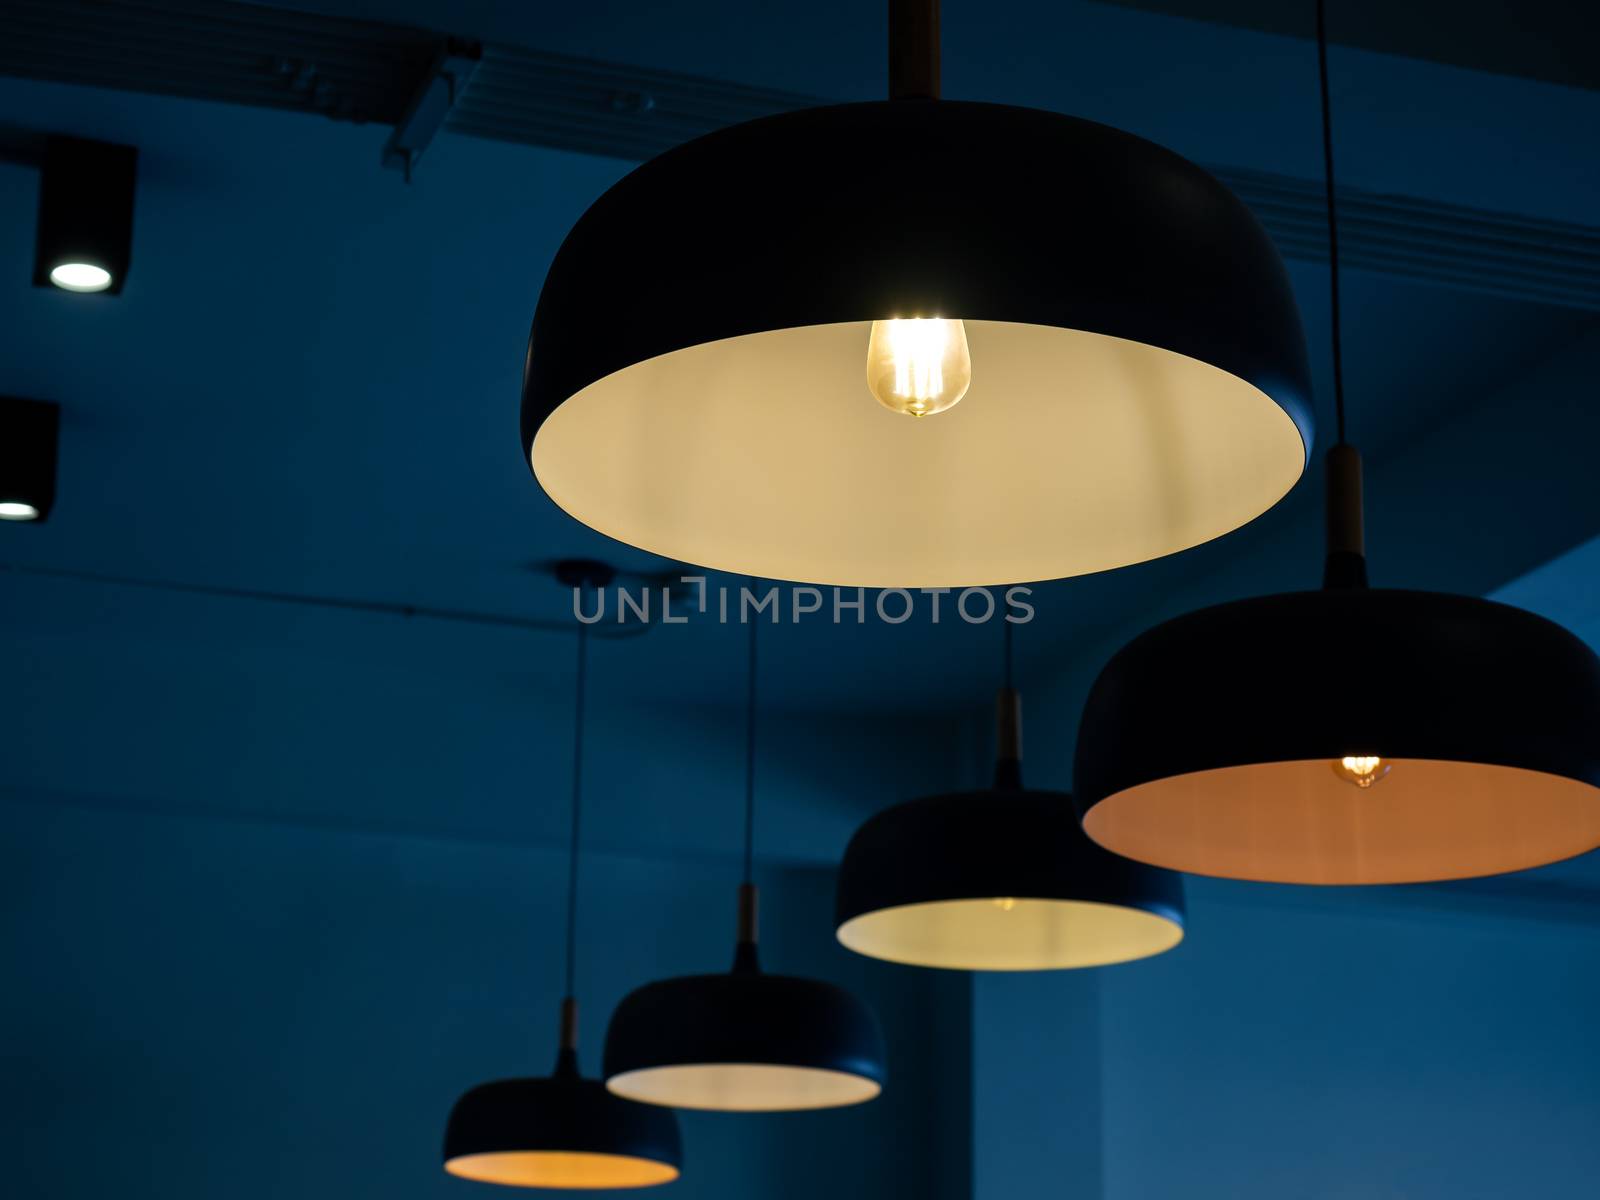 Beautiful round modern ceiling lamps with light bulbs in dark blue room background.